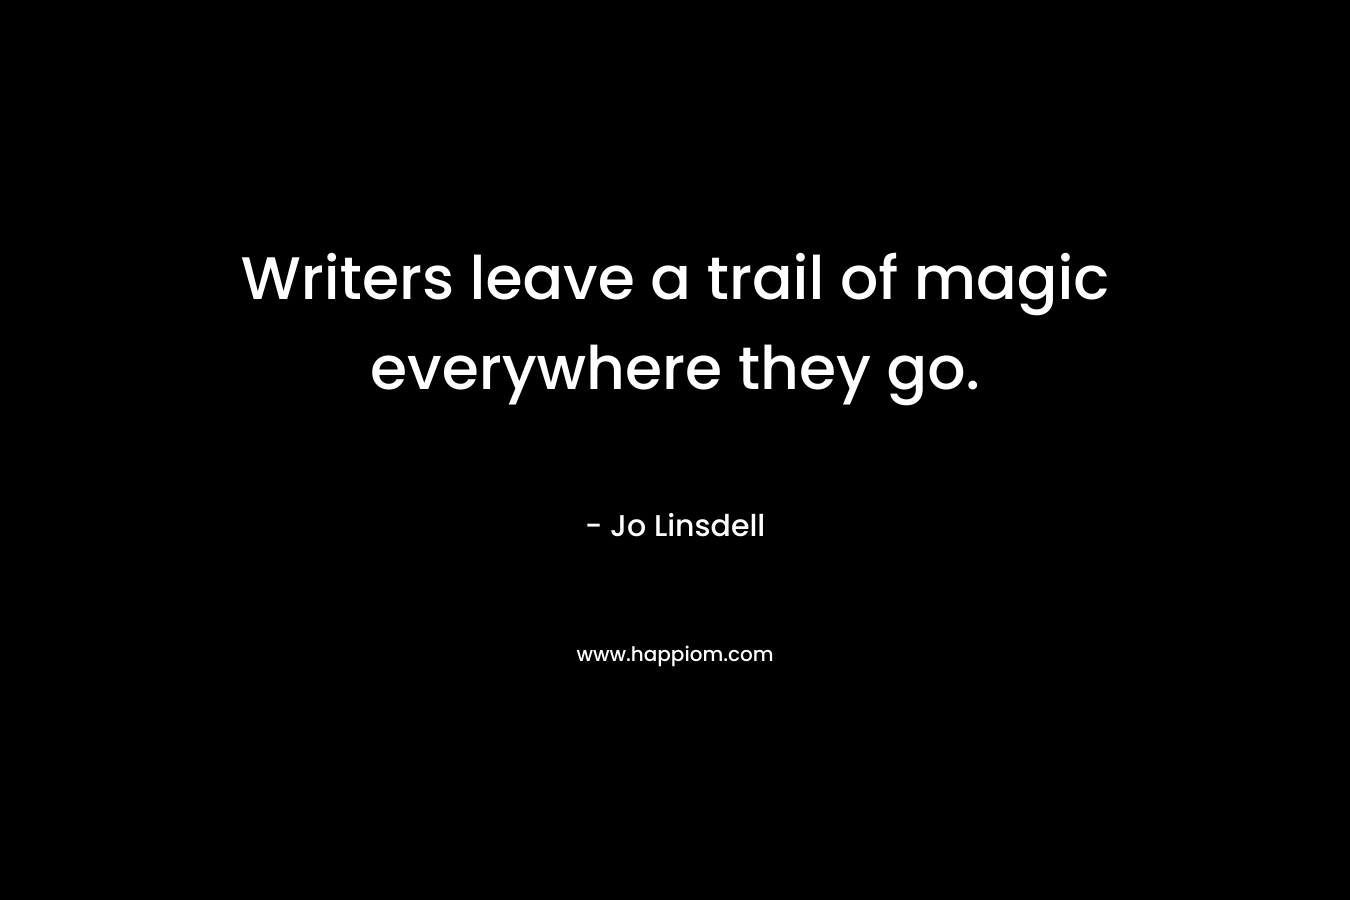 Writers leave a trail of magic everywhere they go. – Jo Linsdell